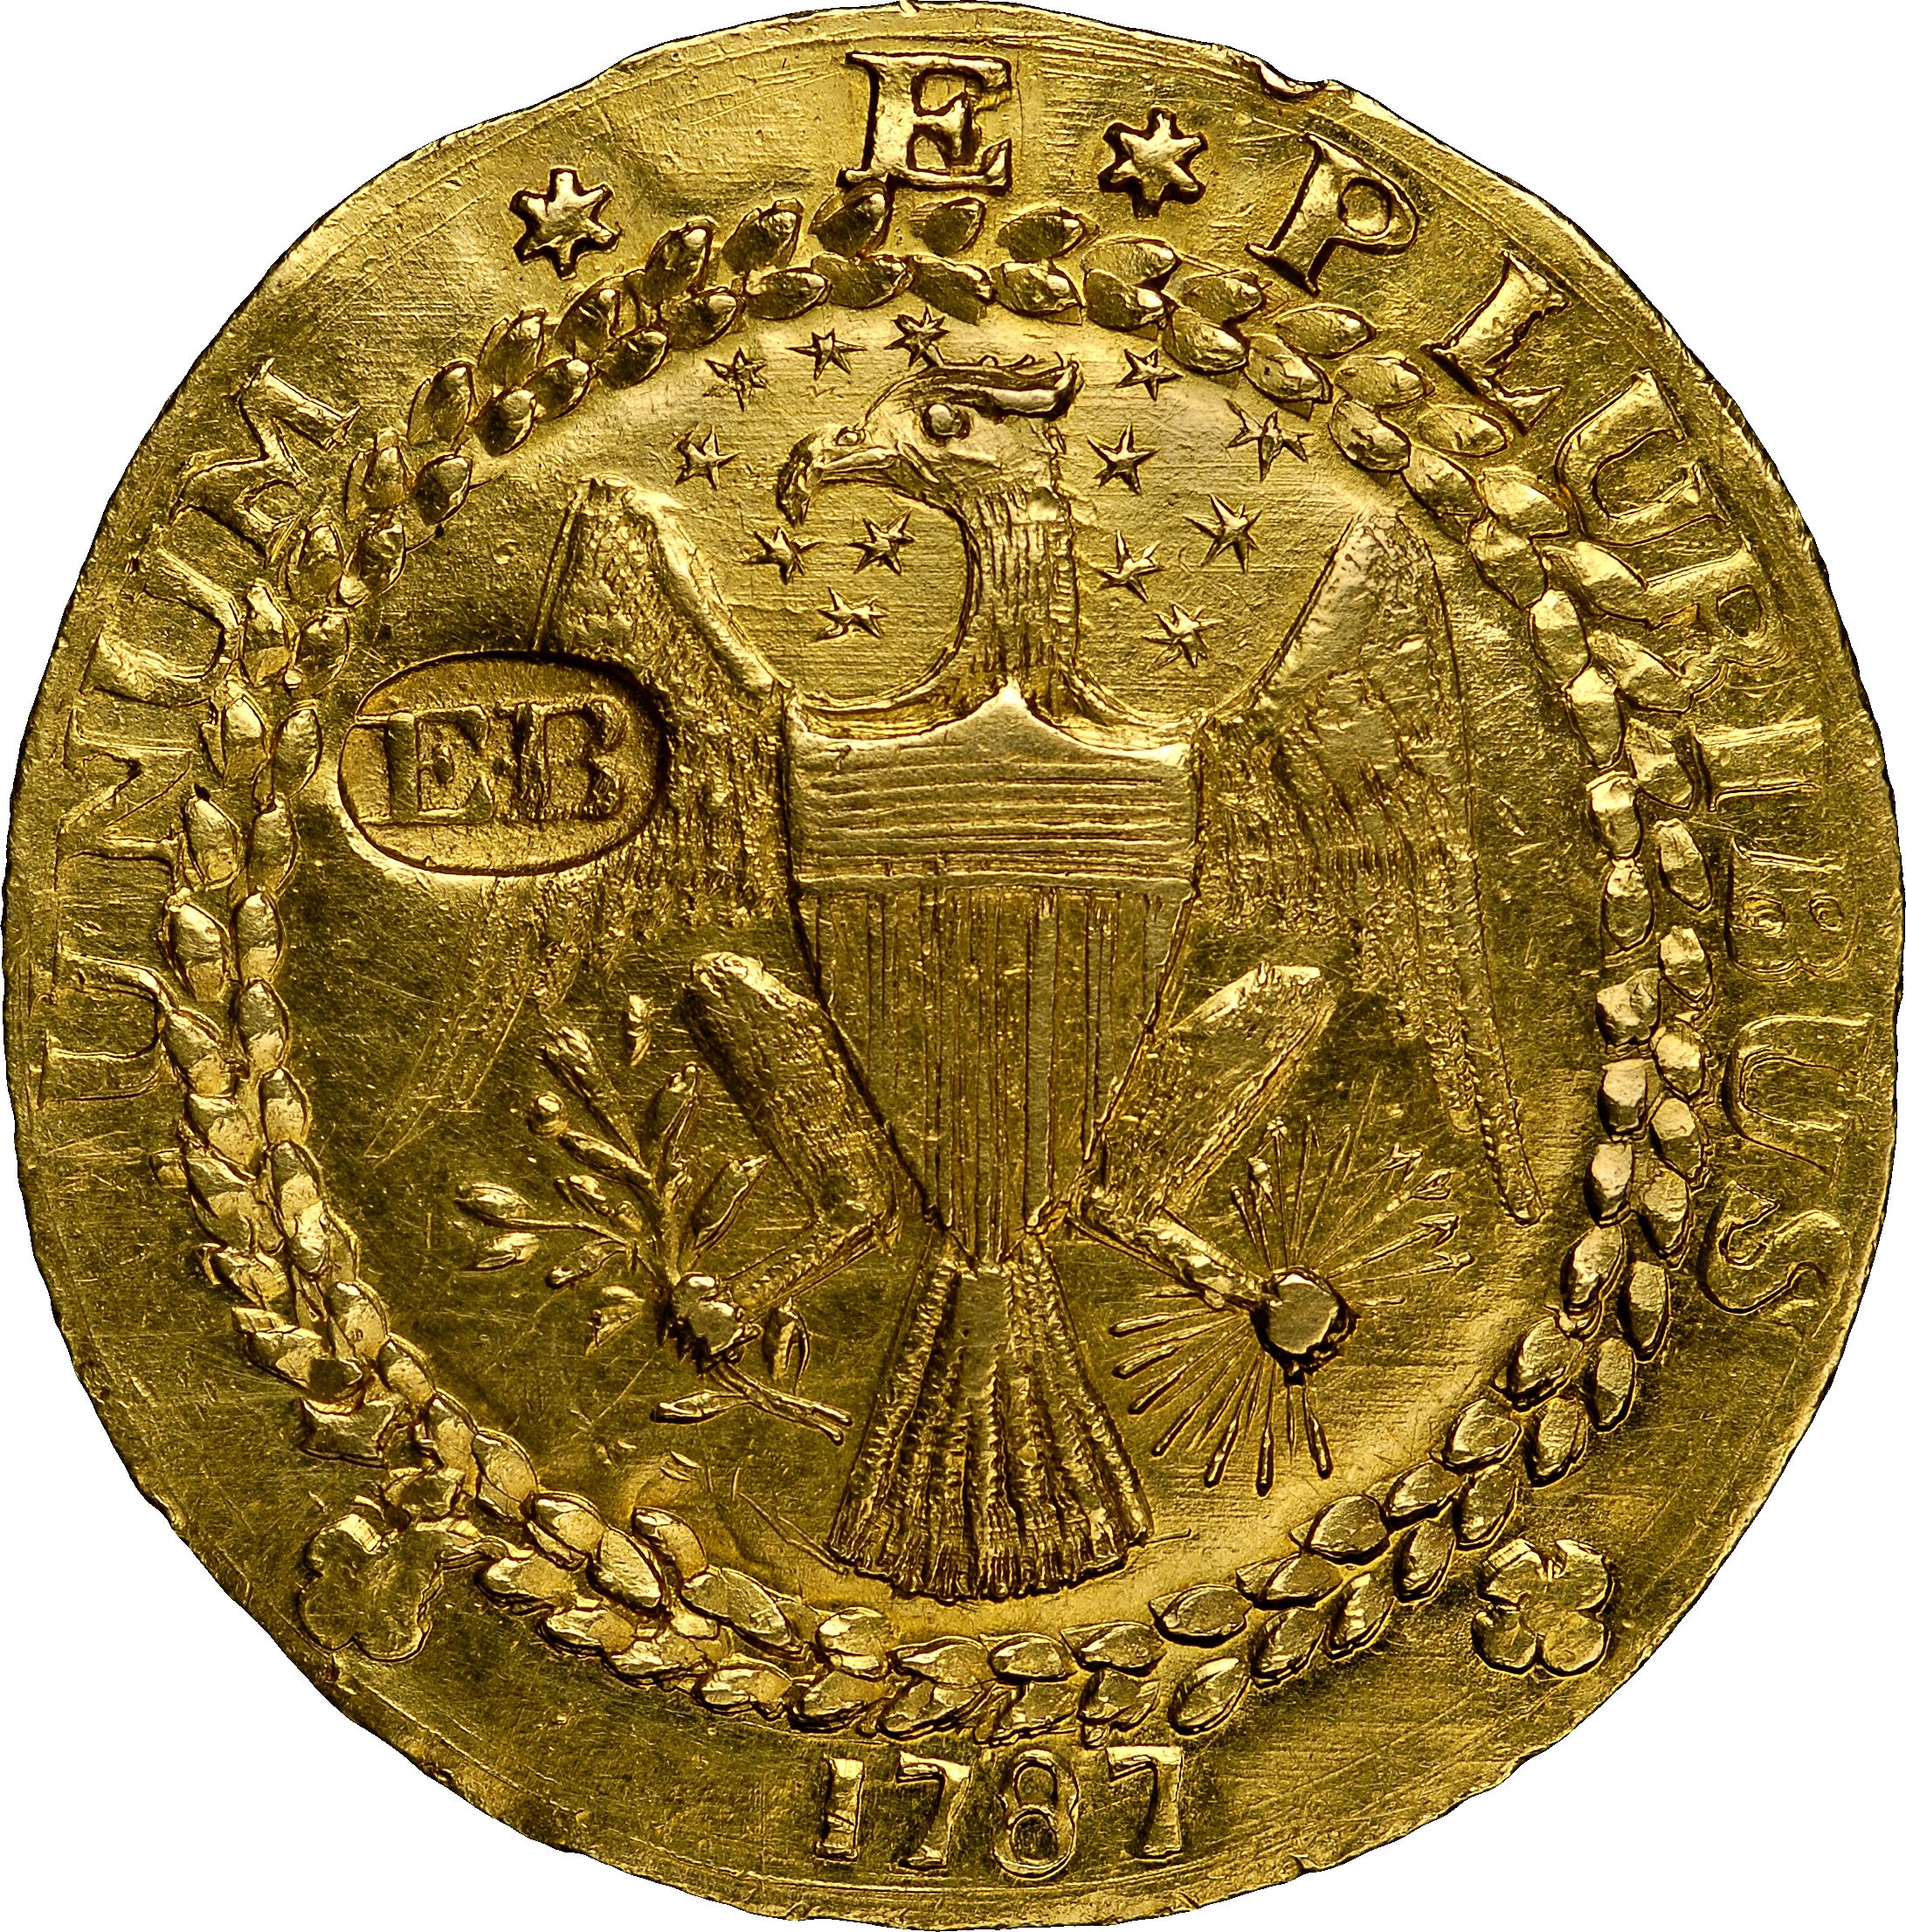 Insured for $10 million, the legendary 1787 Brasher Doubloon will be displayed to the public by Monaco Rare Coins at the 2014 Chicago World's Fair of Money, August 5 - 9, 2014. (Photo by NGC.)